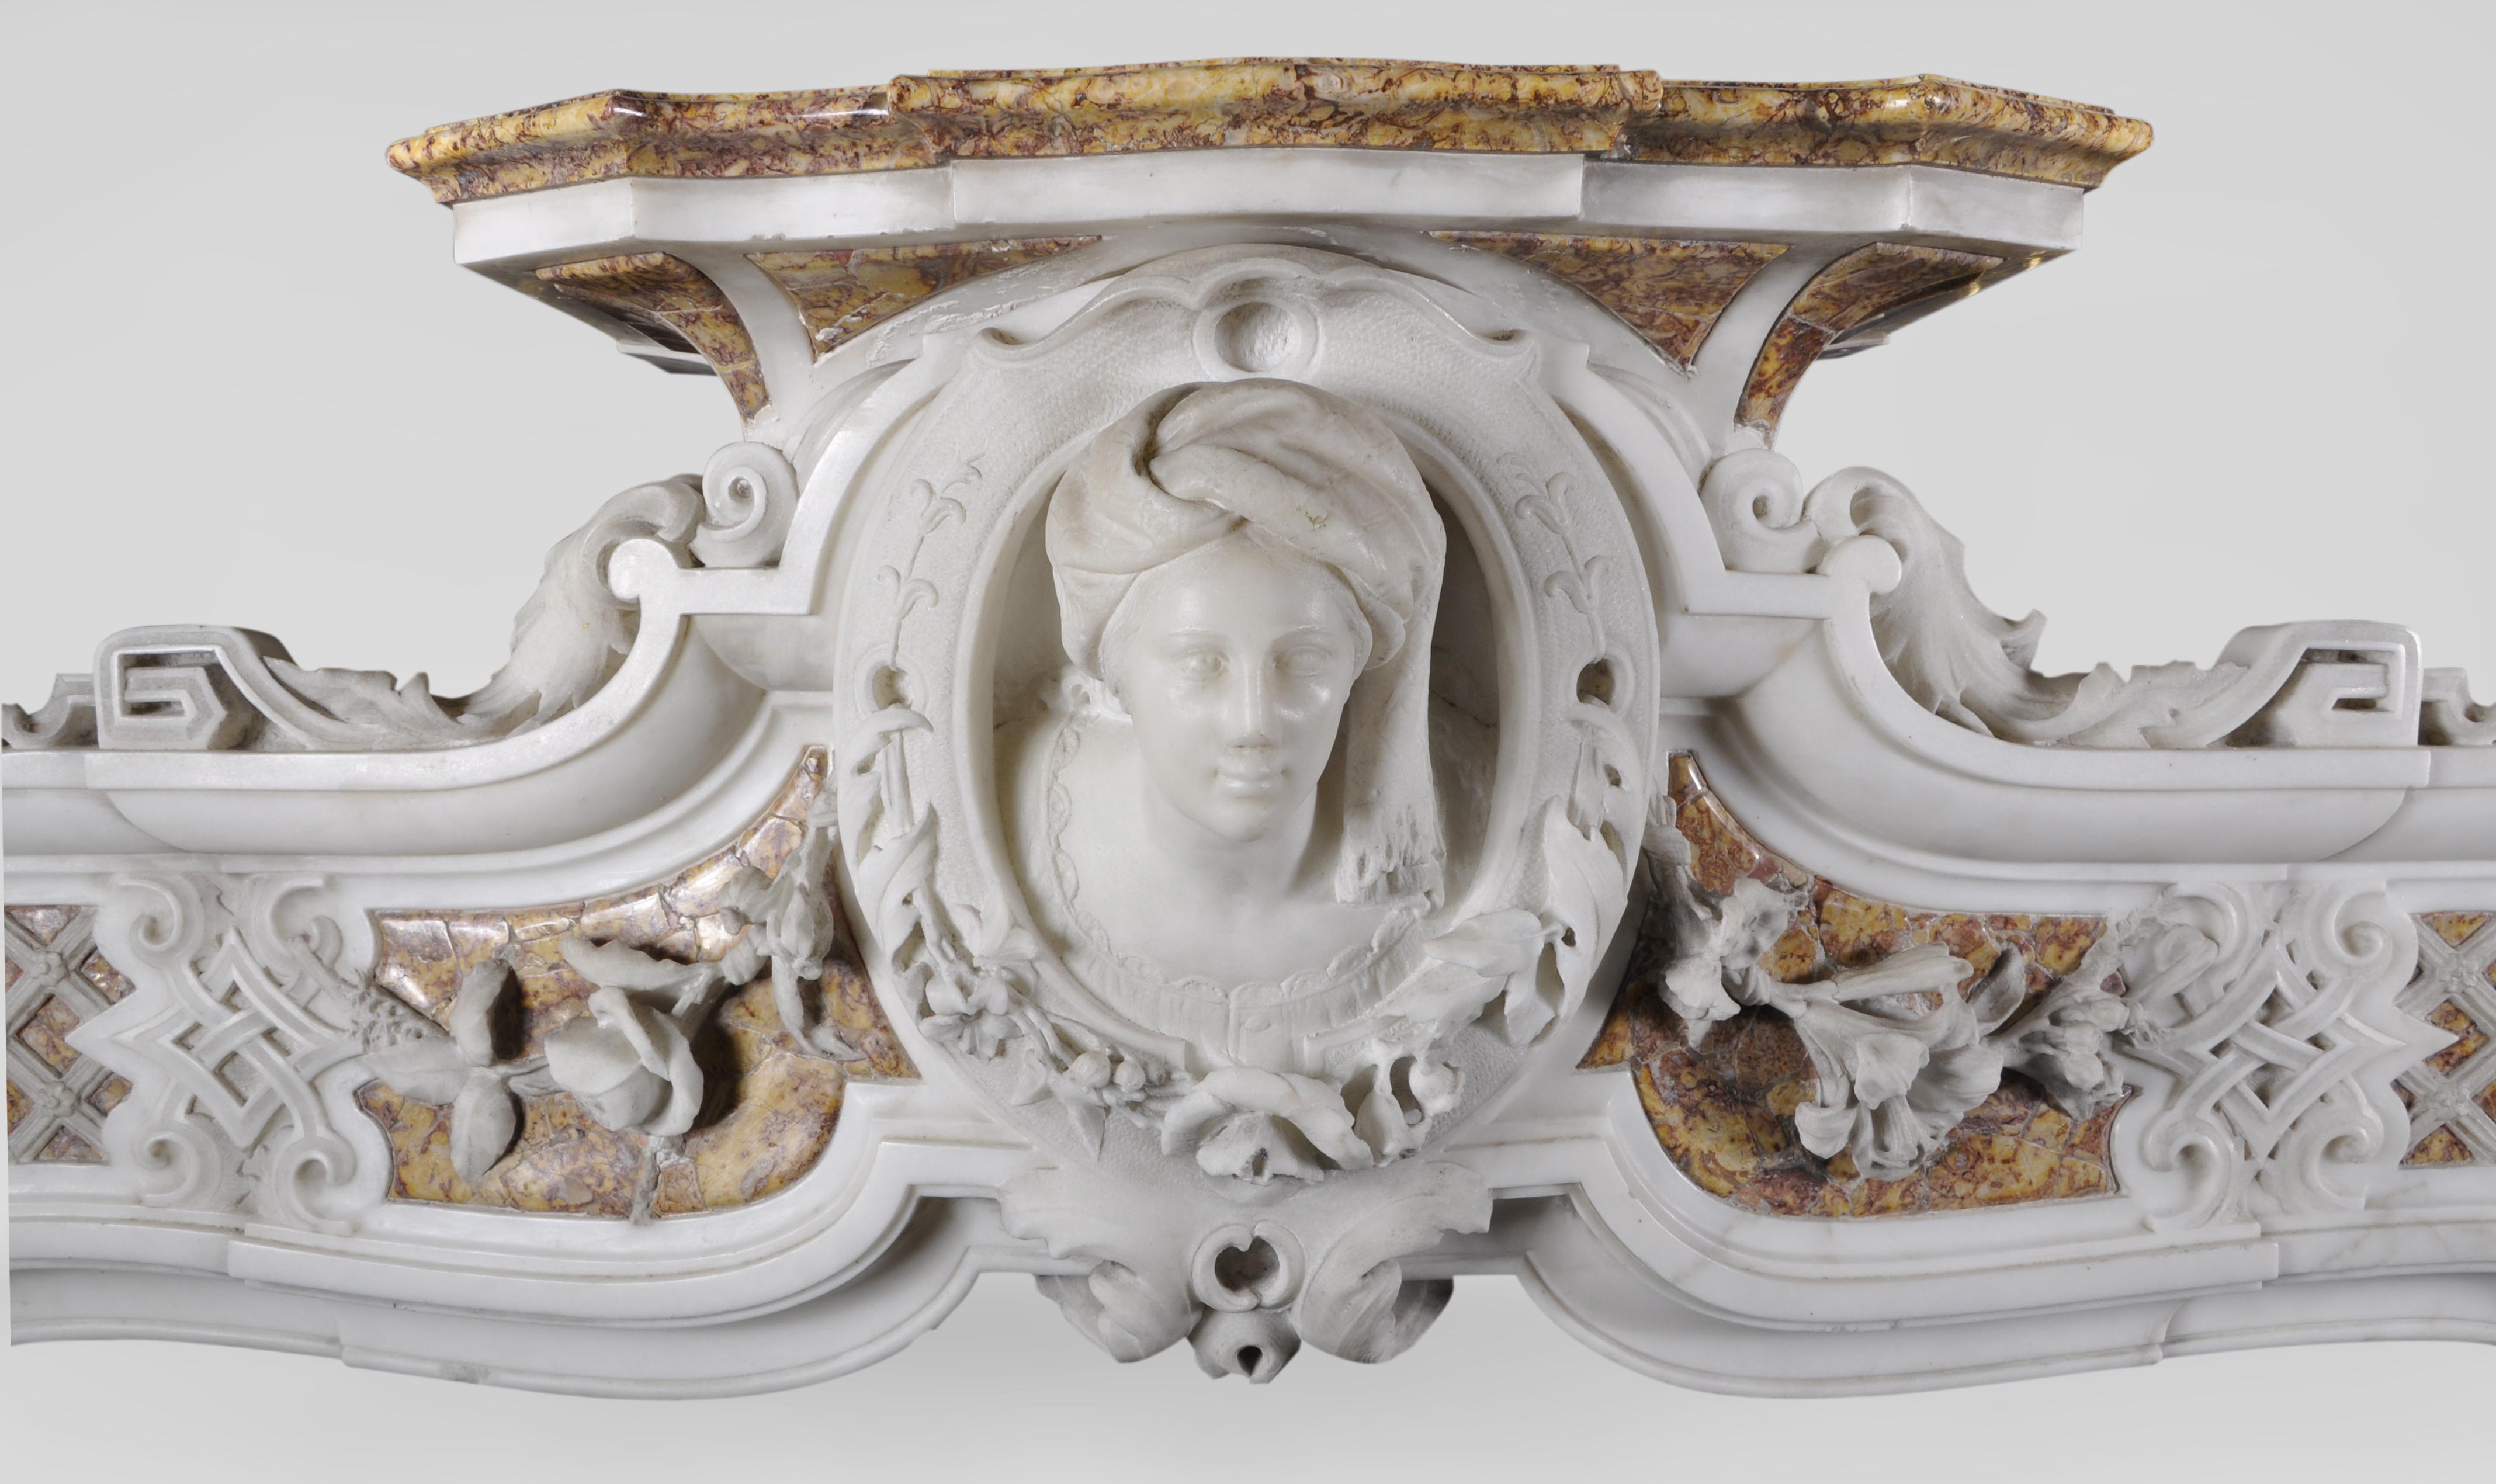 This exceptionnal baroque fireplace is from Italy, dated as the end of the 18th century. It is an outstanding marble piece, and gathers two types of beautiful and distinct marbles; white statuary Carrara marble and Brocatelle marble, characterized